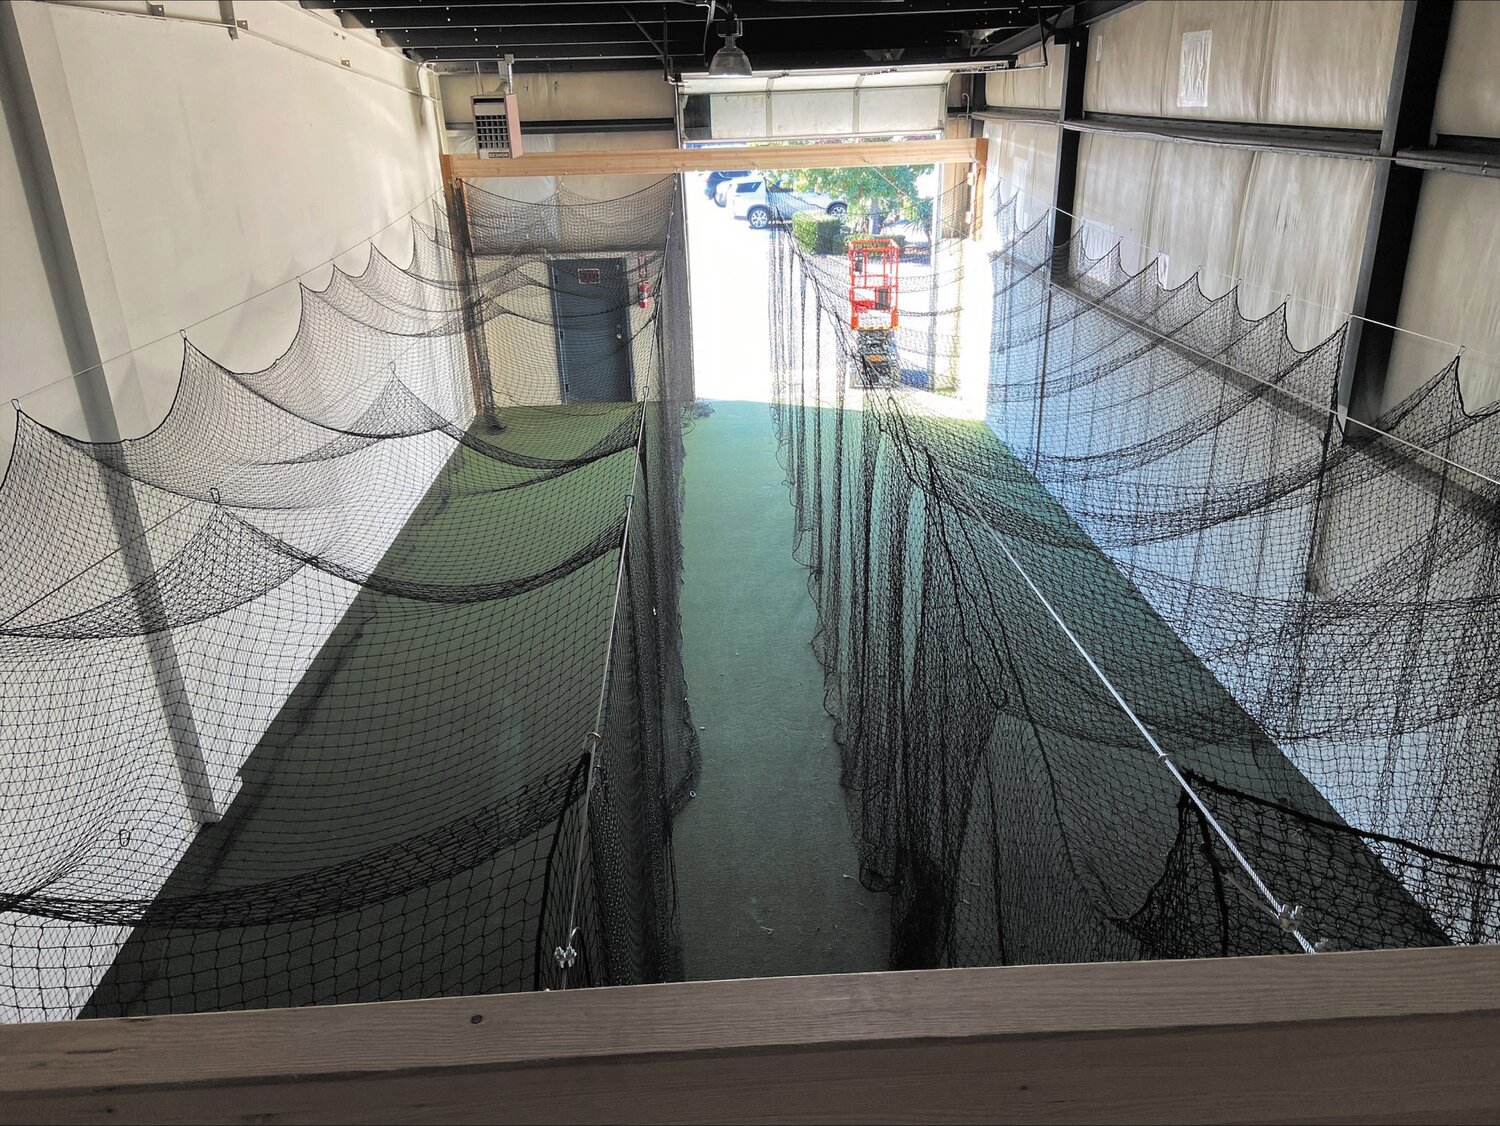 The expanded YARD facility, 305 Creek St., in Yelm will feature two indoor tunnels, a pitching mound and baseball cage.